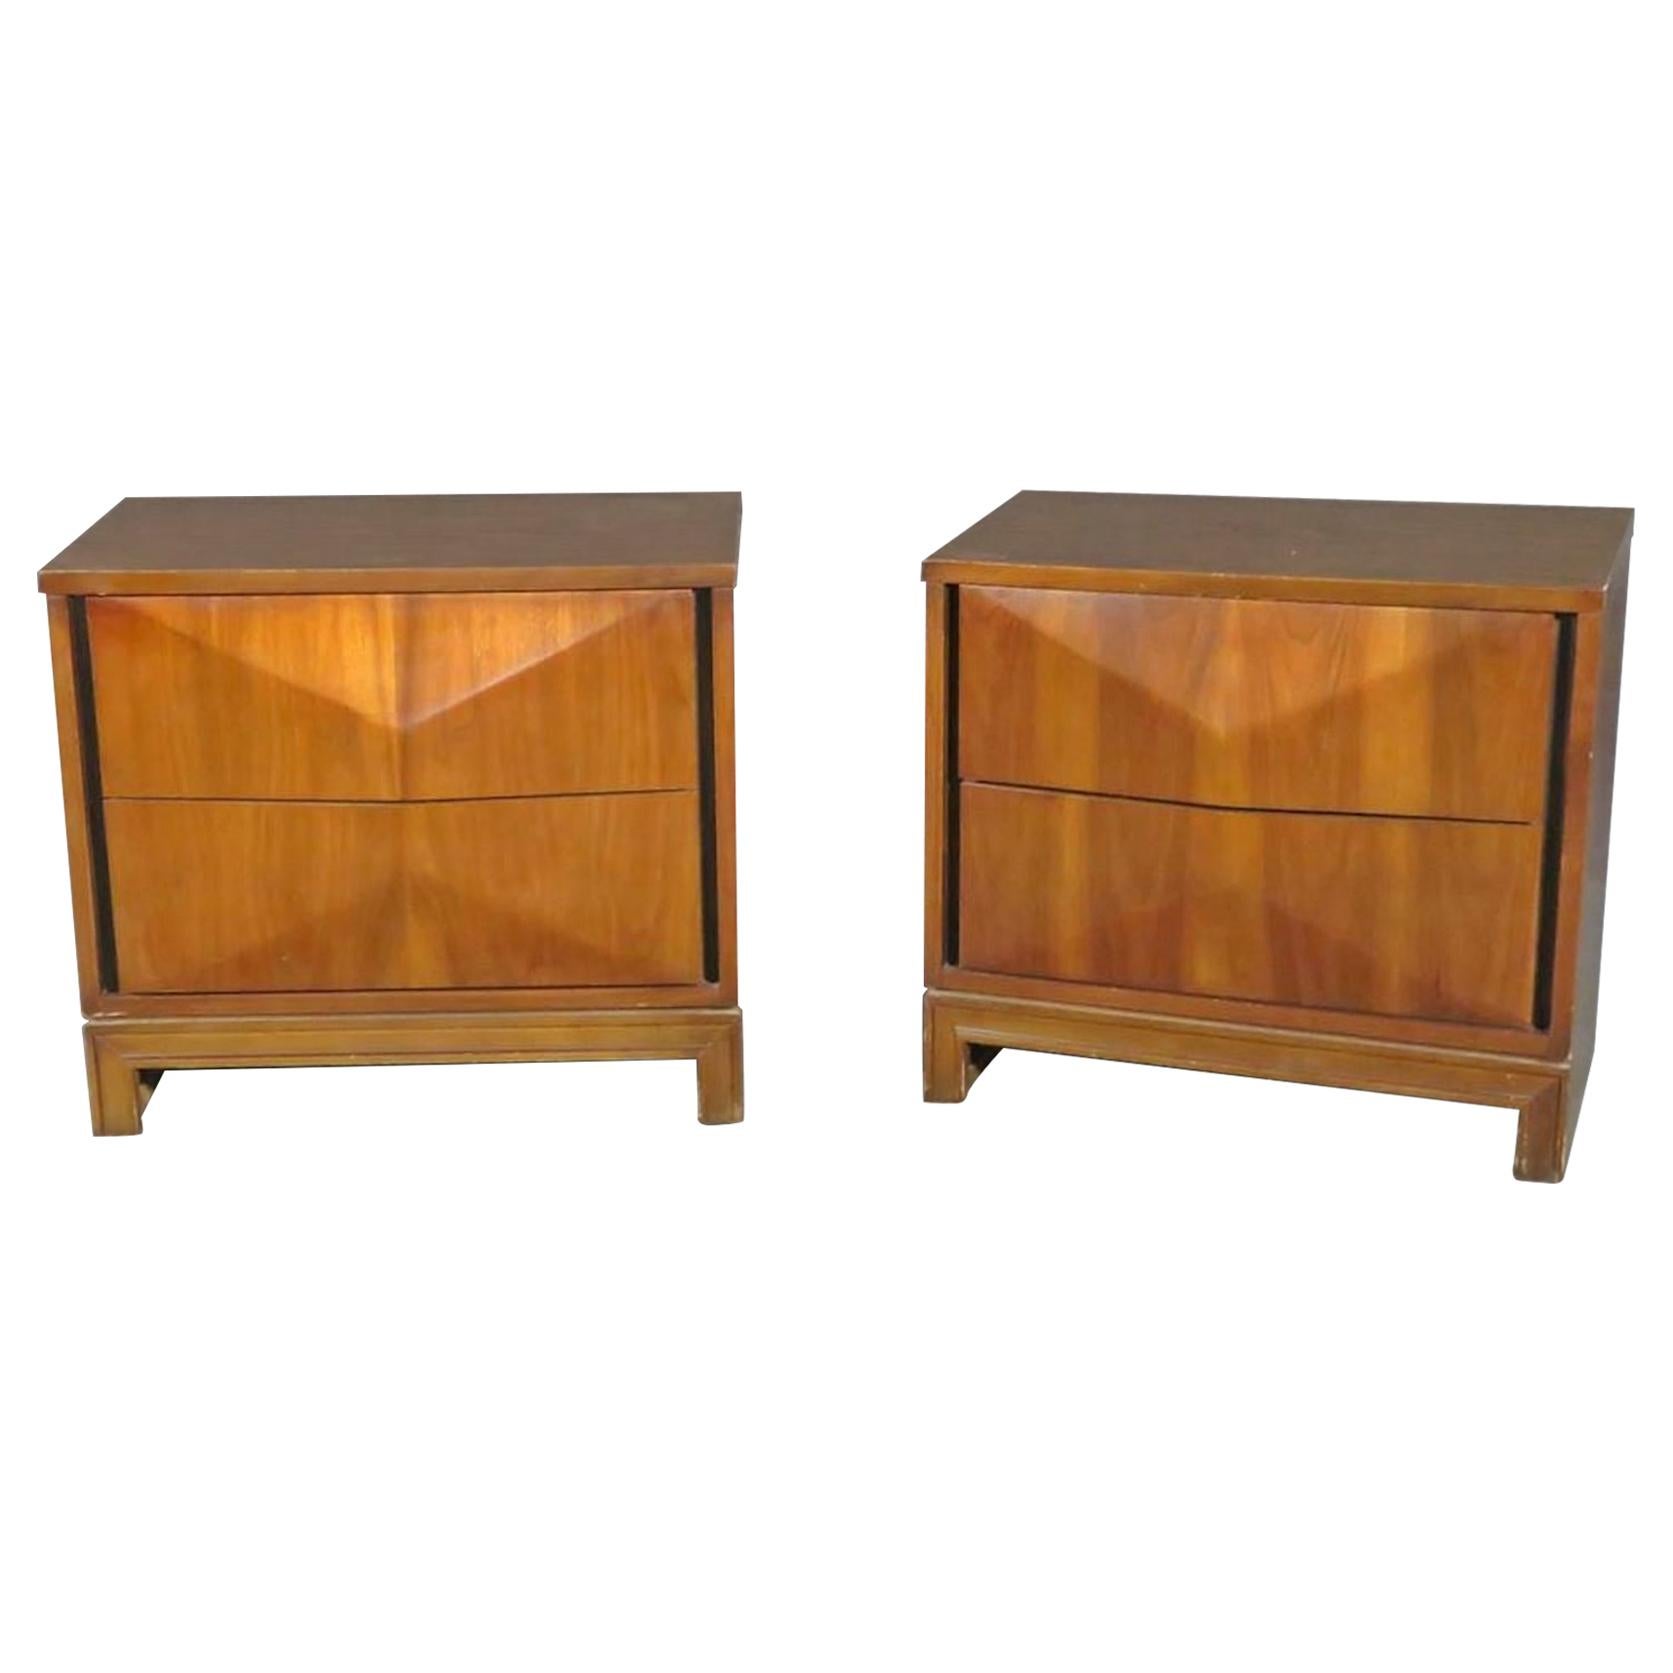 Pair of Diamond Front Night Stands in the Style of Johnson Carper